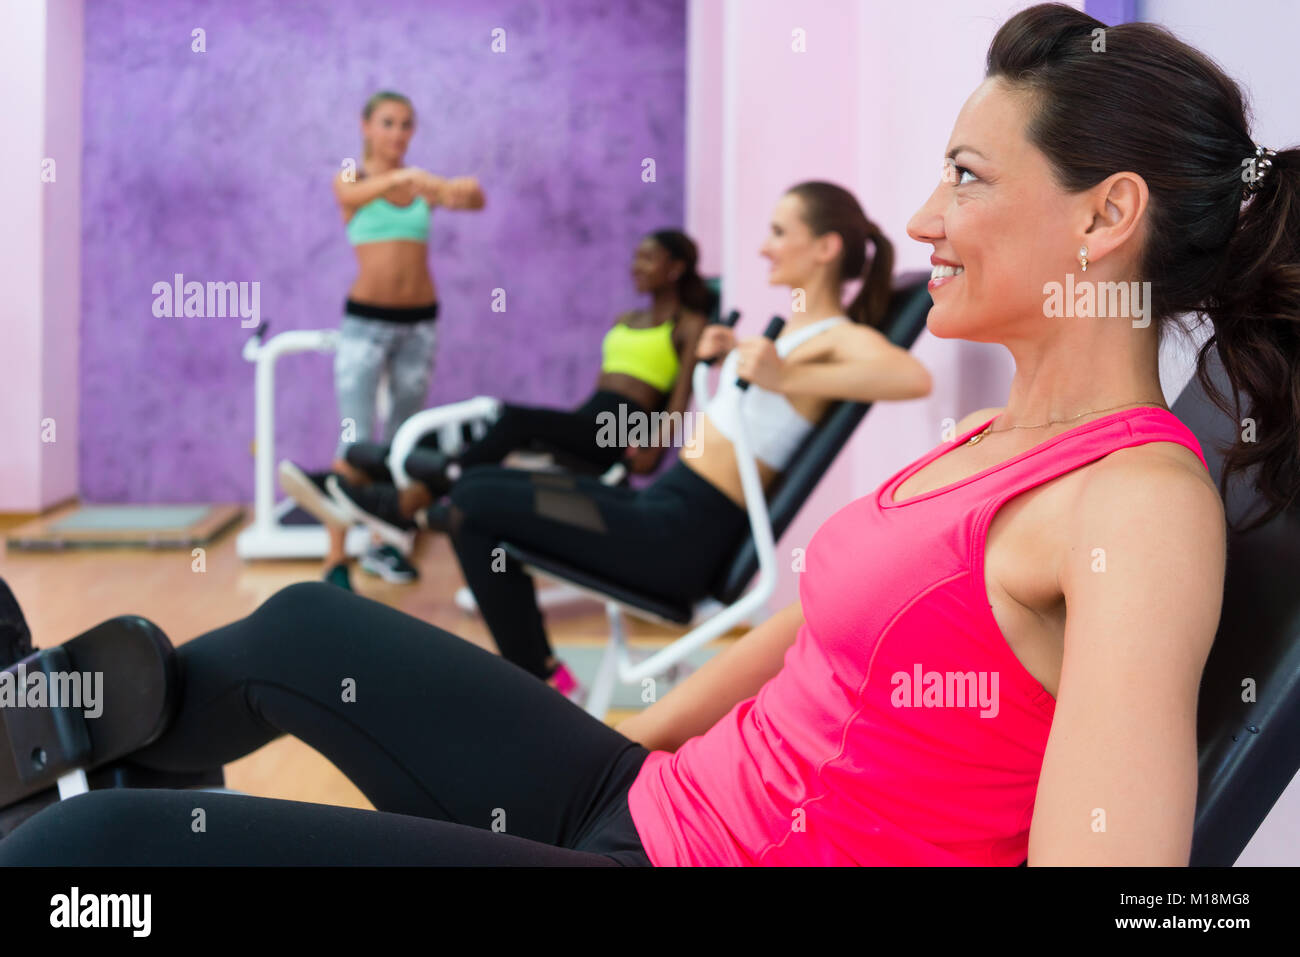 Fit woman listening to fitness instructor with sense of humor du Stock Photo